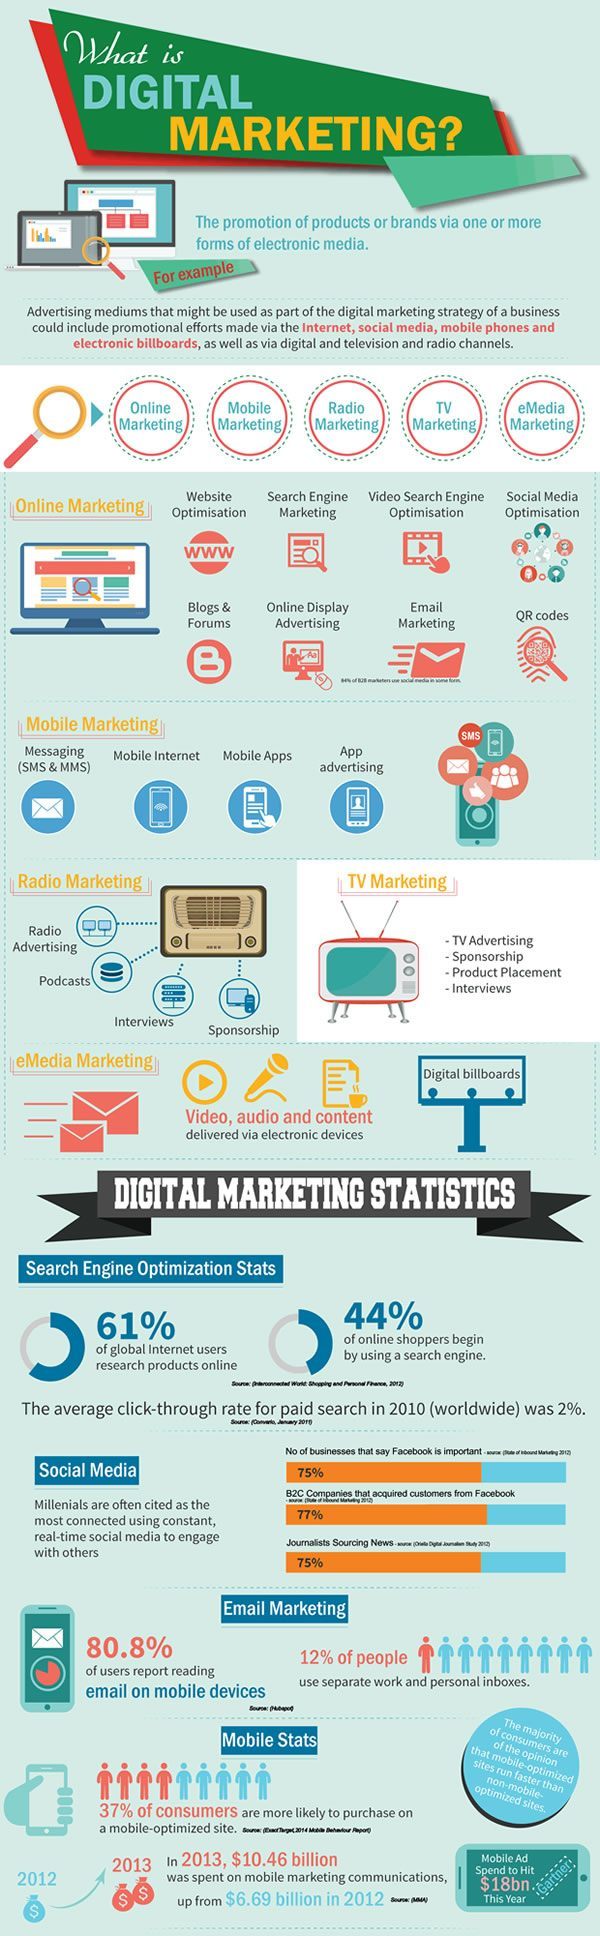 21 digital marketing infographics for businesses and marketers just getting started